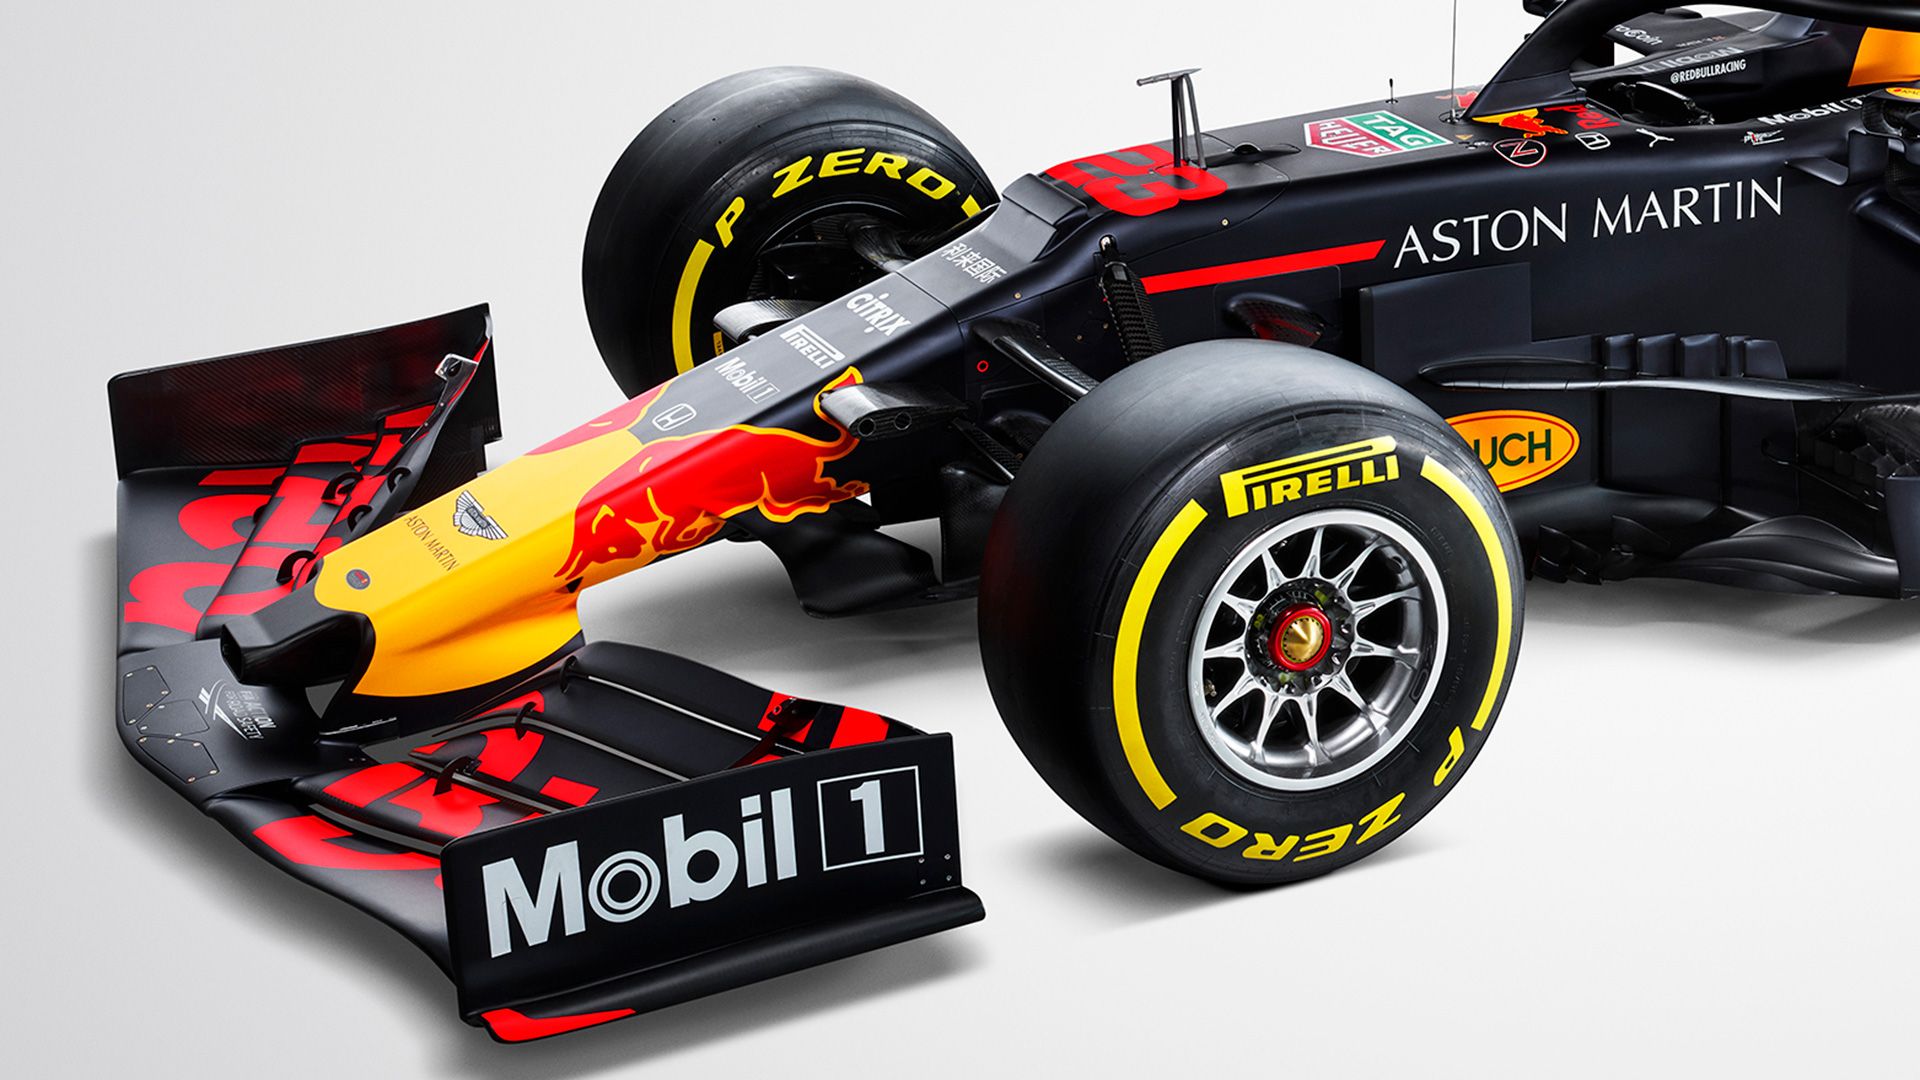 RAPID REACTION: Our first take on Red Bull's RB16. Formula 1®